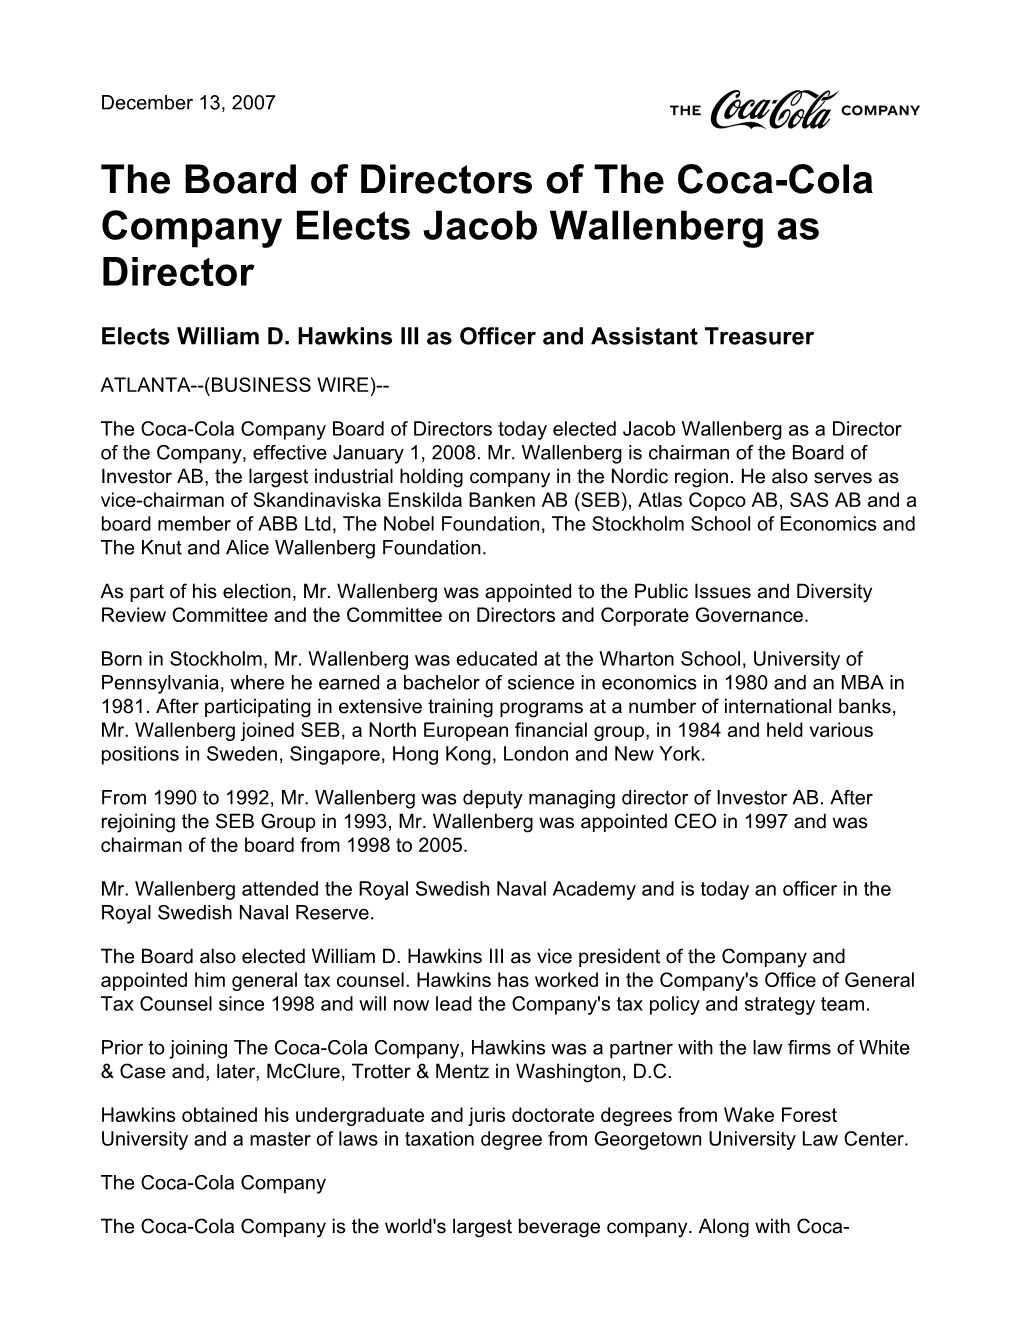 The Board of Directors of the Coca-Cola Company Elects Jacob Wallenberg As Director